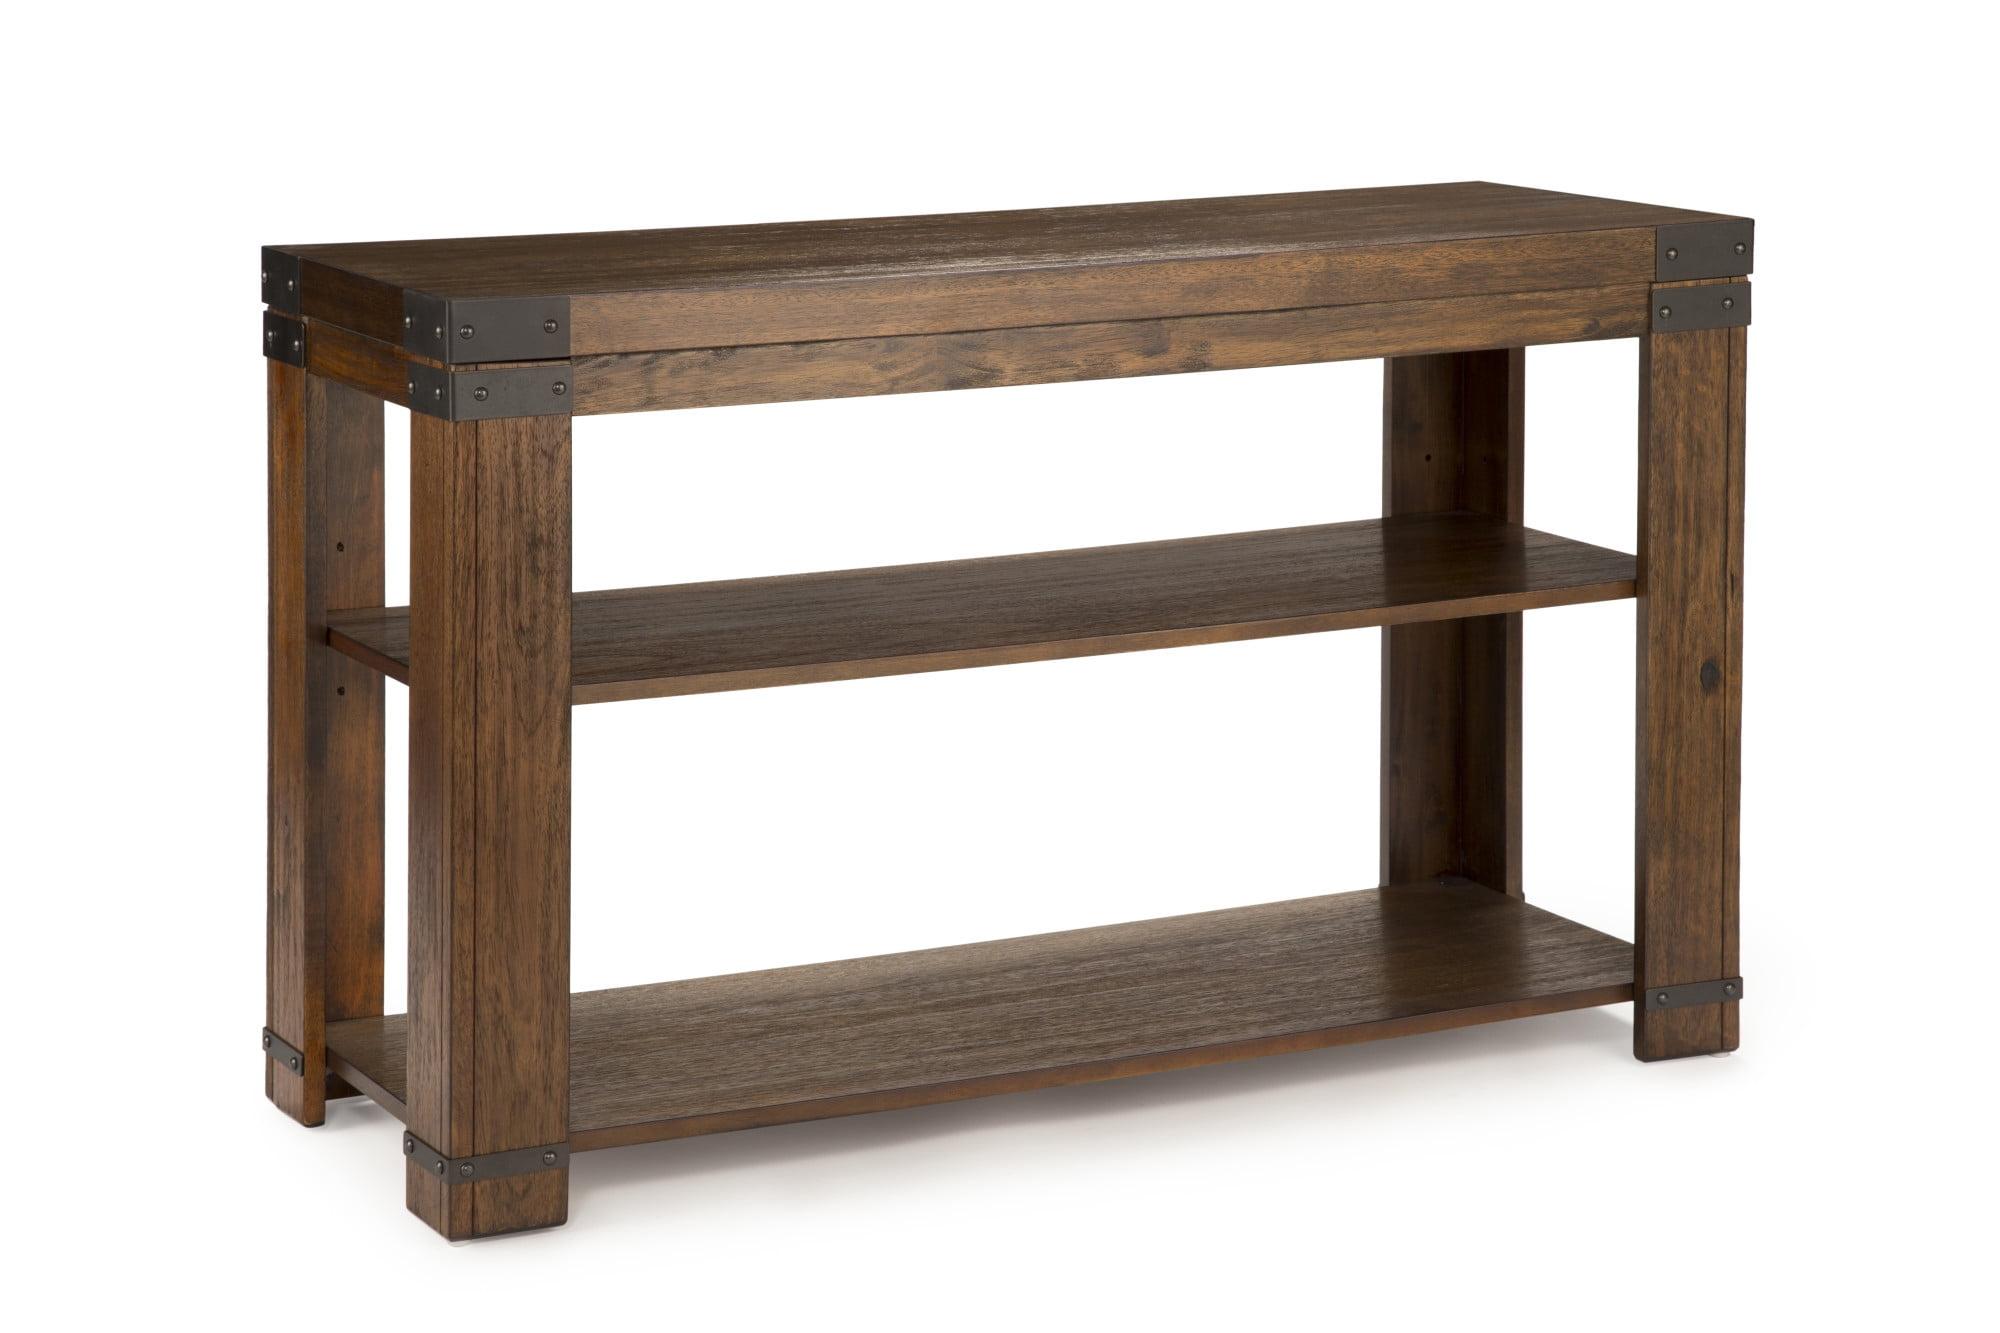 Arusha Medium Cherry Solid Wood Console Table with Storage